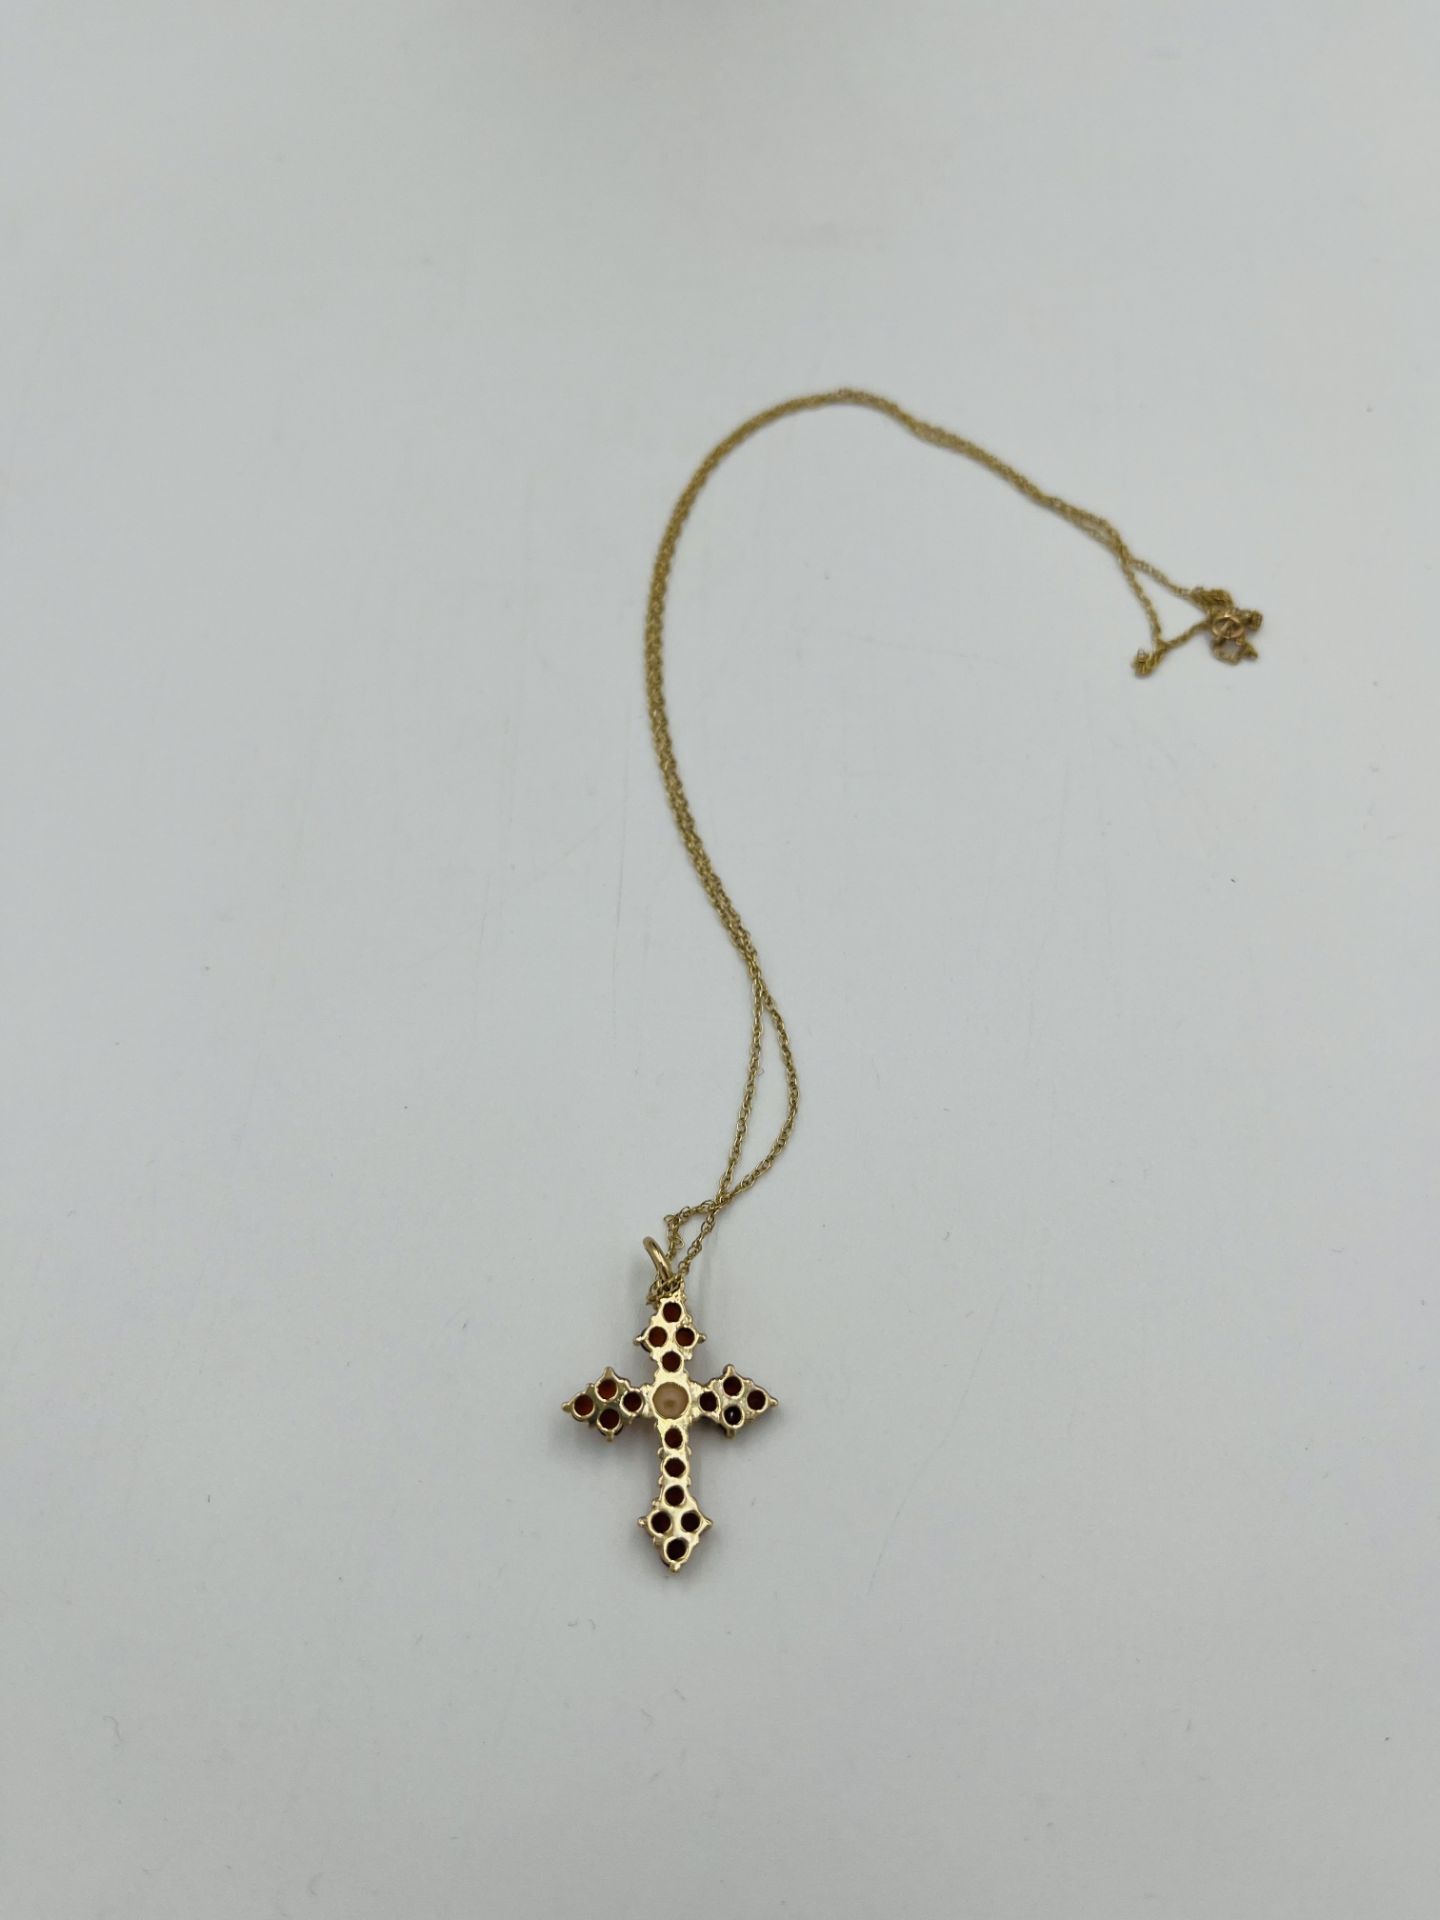 9ct gold cross - Image 6 of 6